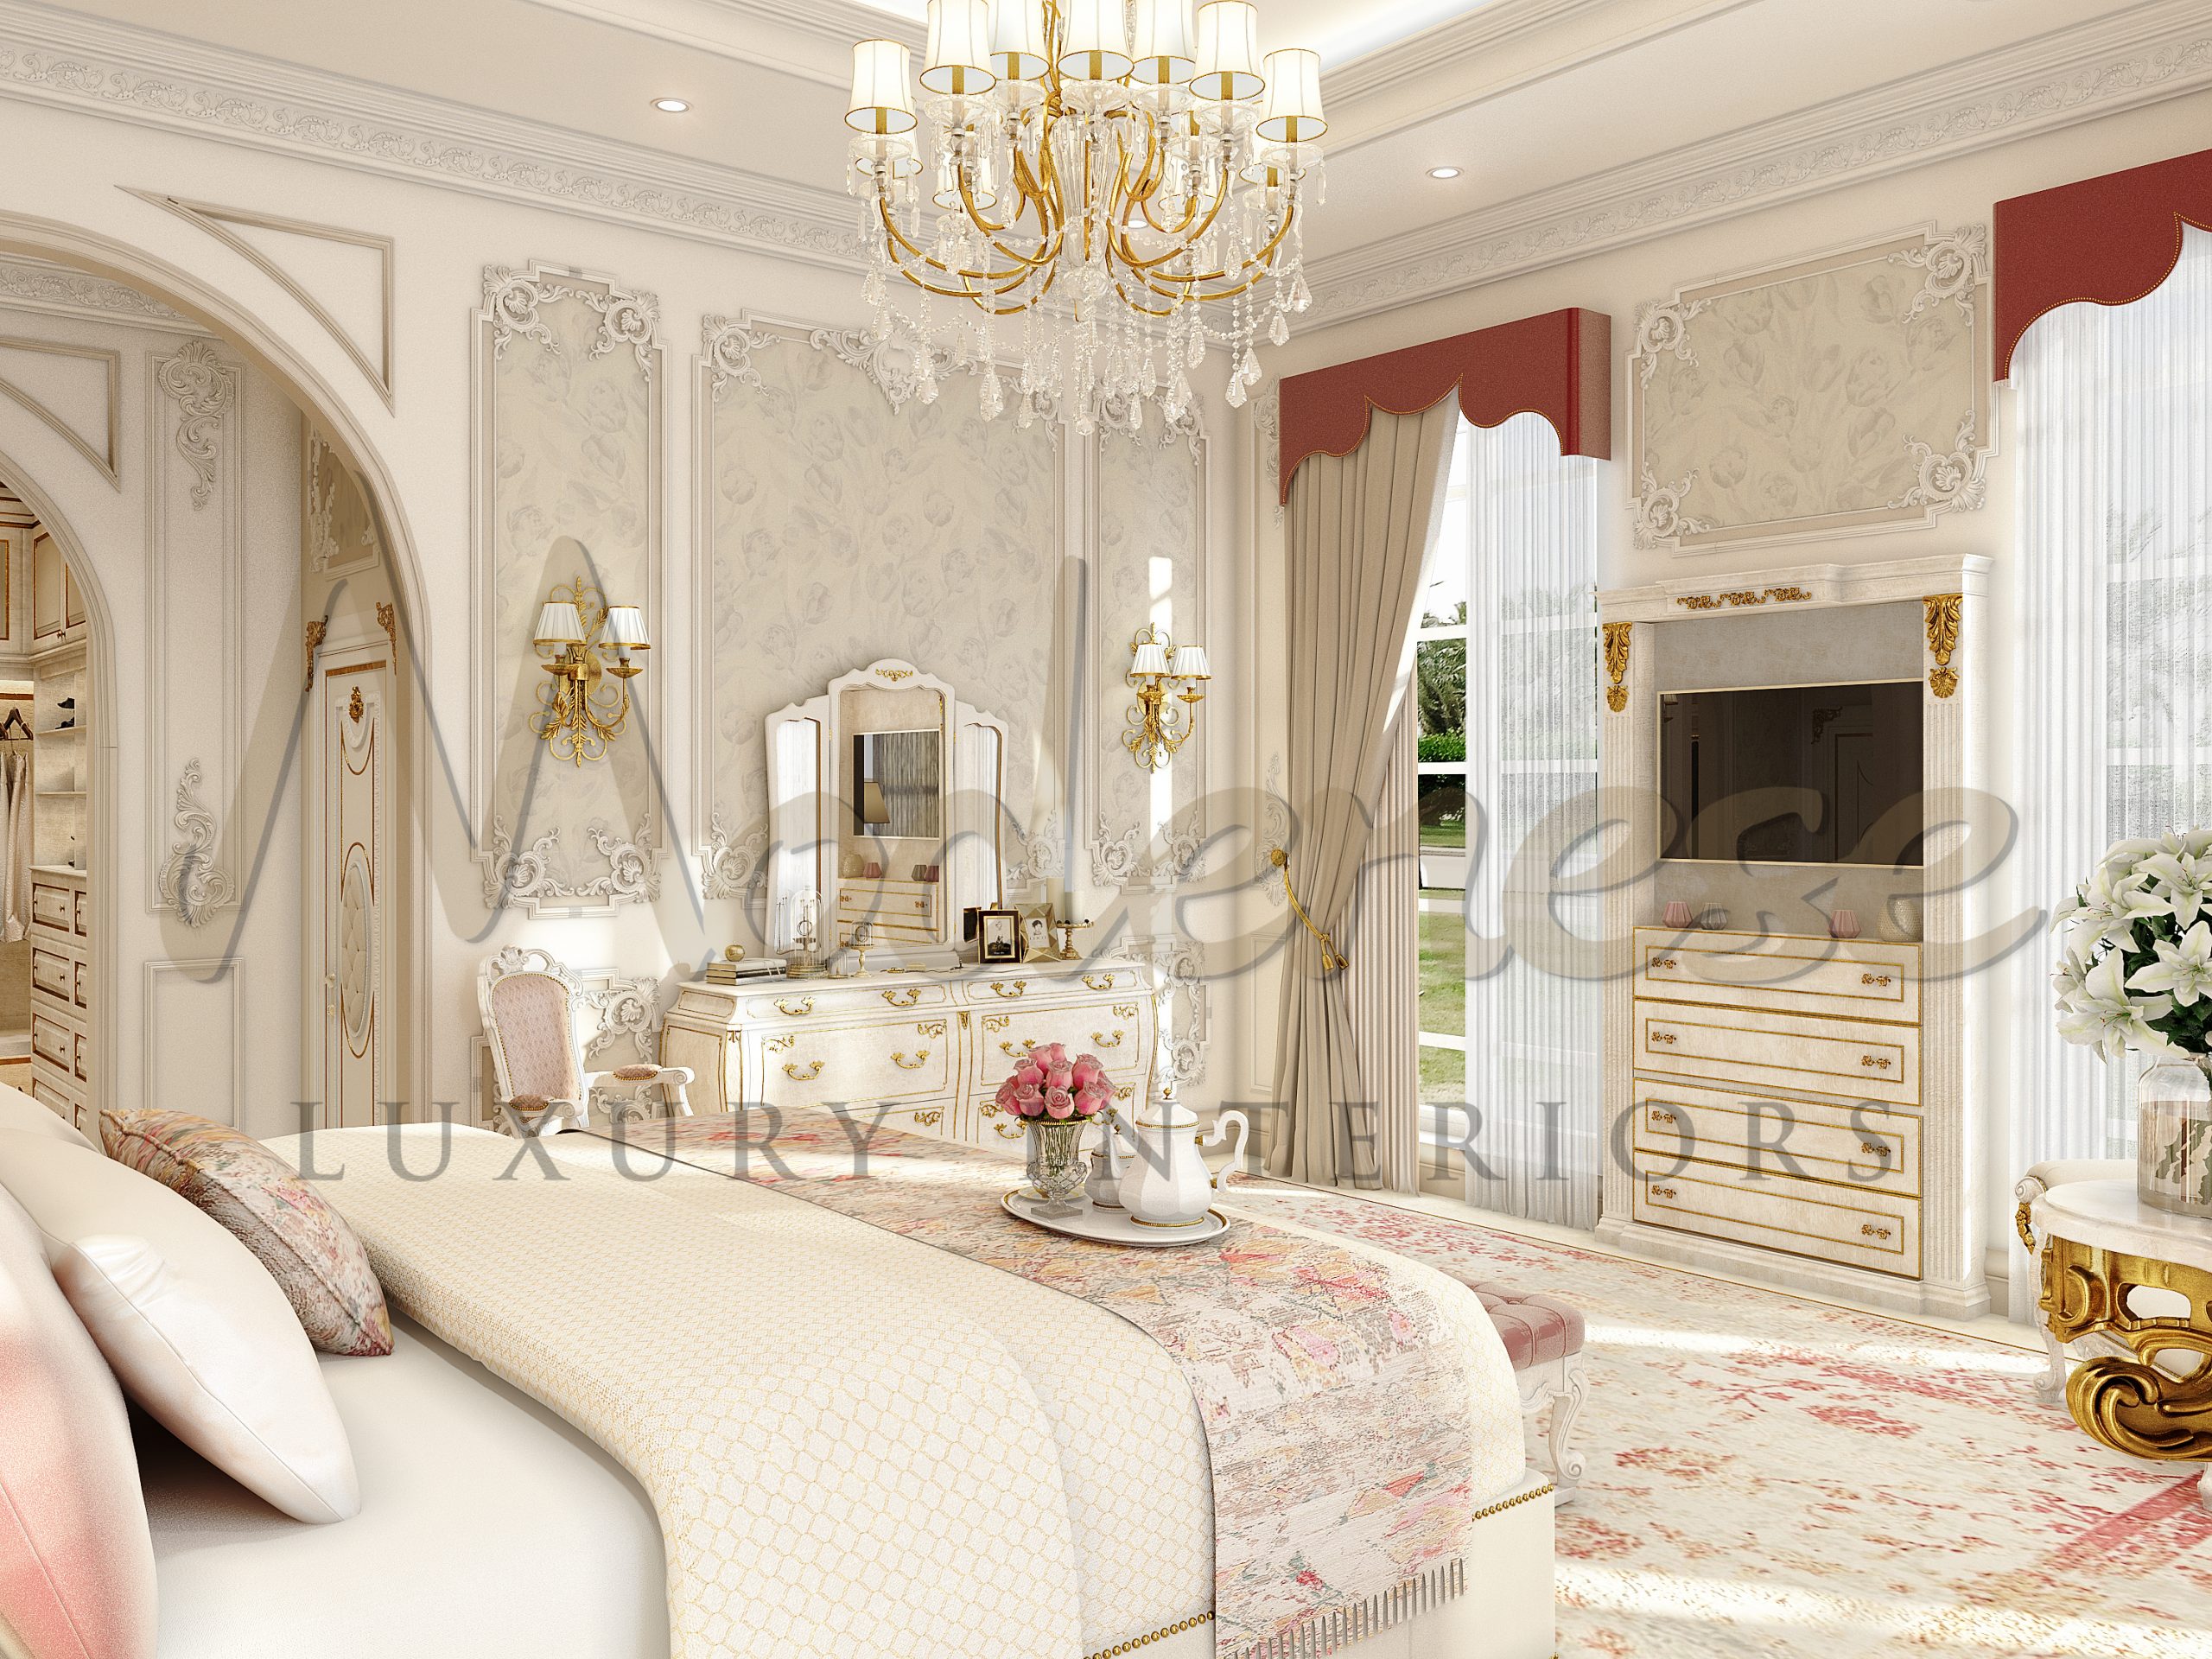 Exquisite Classical Bedroom For Mansion in Kenya